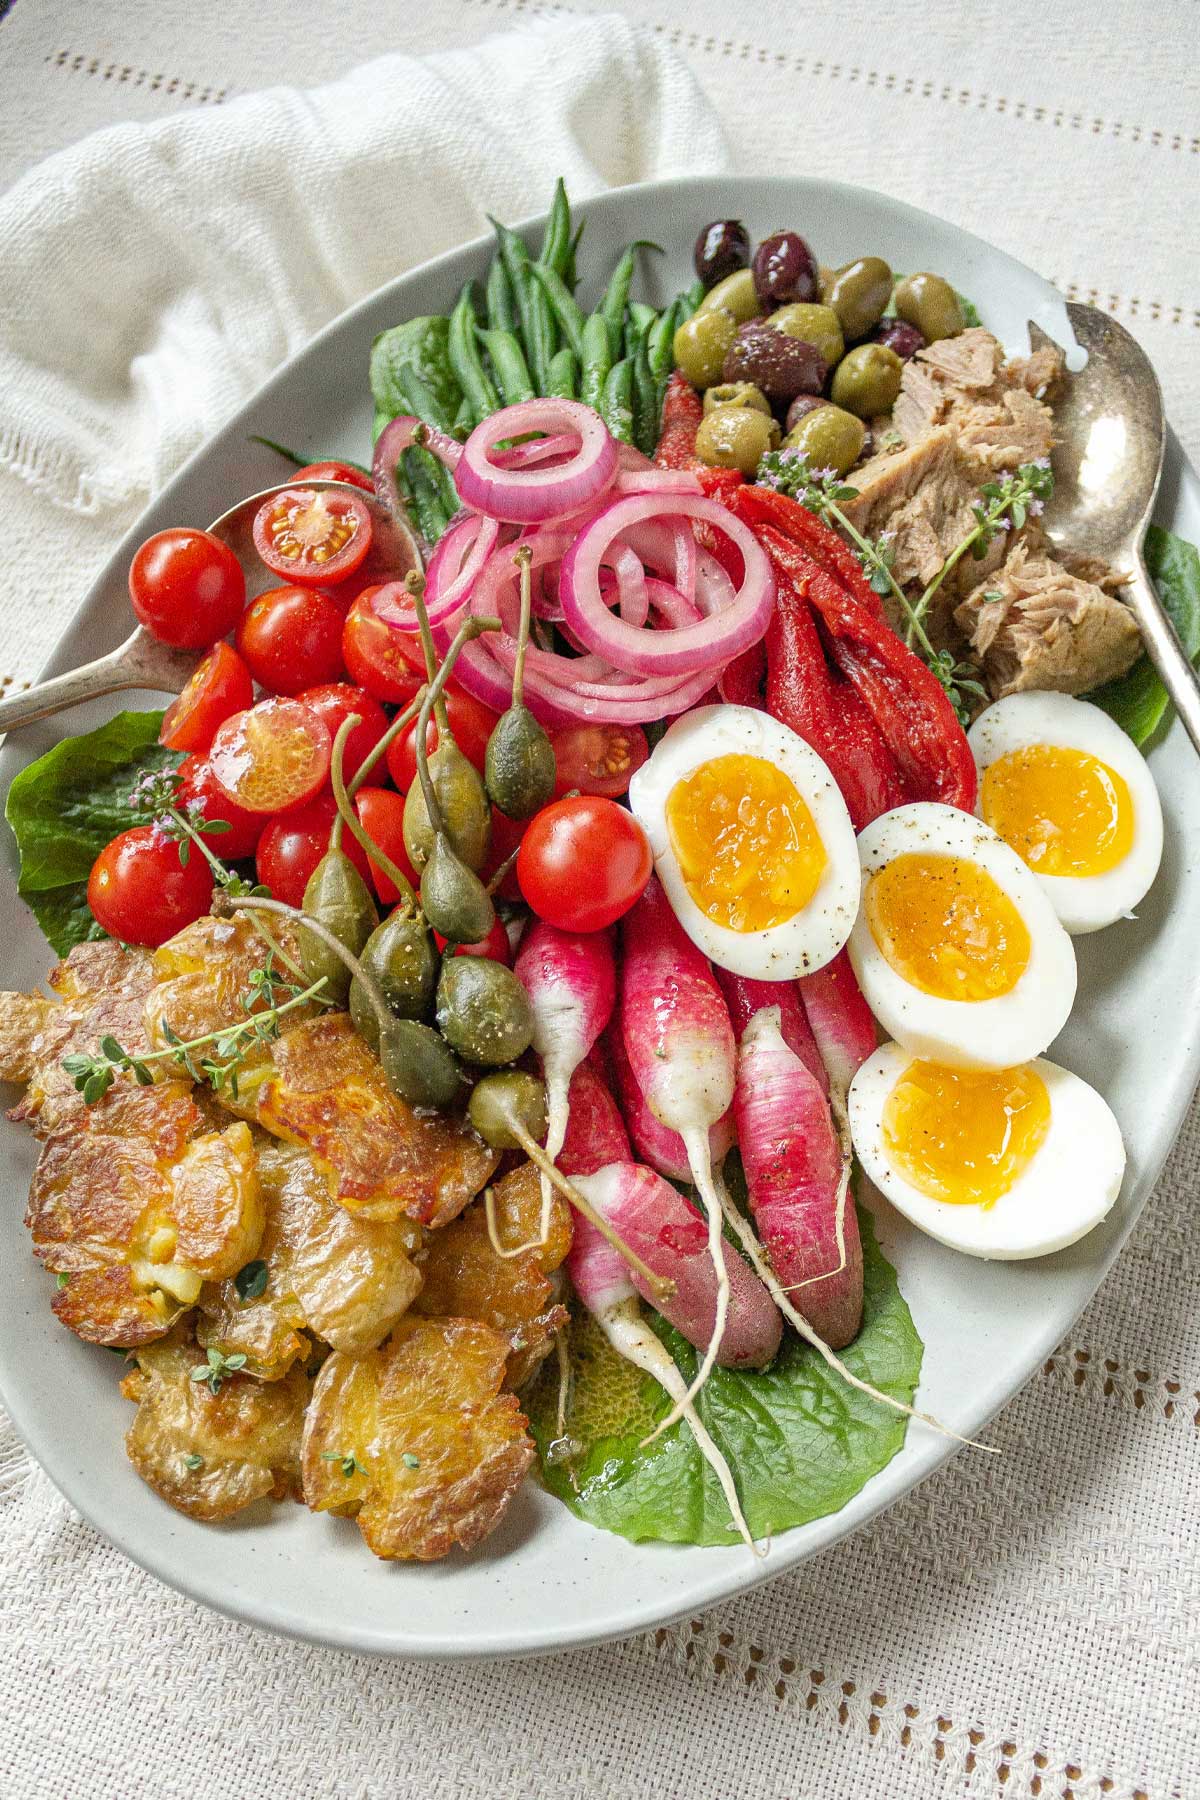 A platter filled with the ingredients for a classic Niçoise salad: green beans, olives, tinned tuna, eggs, potatoes, capers, tomatoes, and garden-fresh greens and herbs.